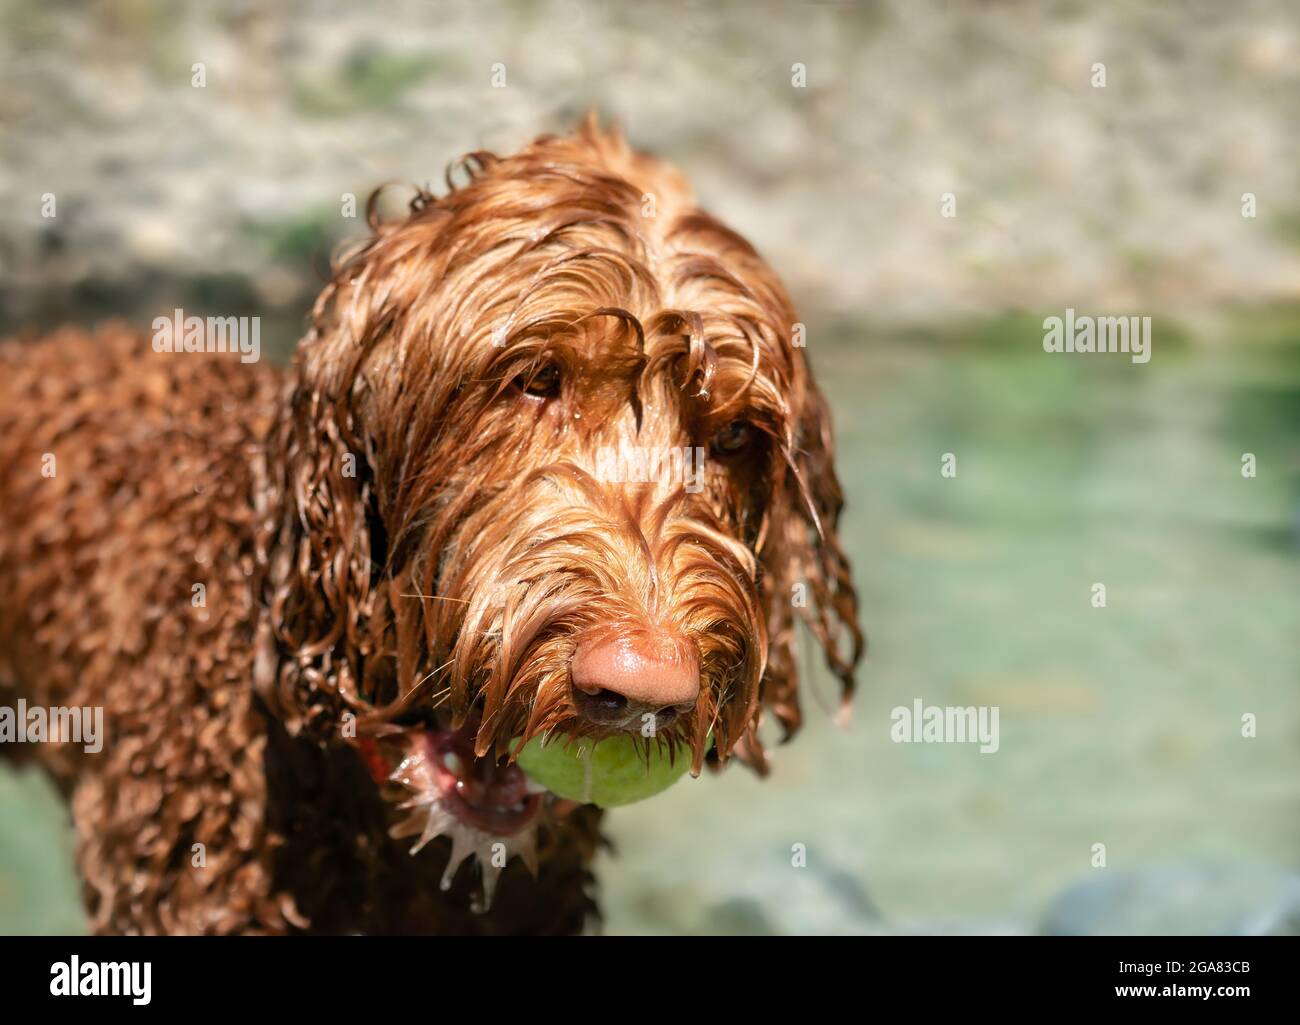 Labradoodle dog in river with tennis ball in mouth and dripping wet fur. Playtime with female dog fetching and swimming on a sunny day. Dog in motion. Stock Photo